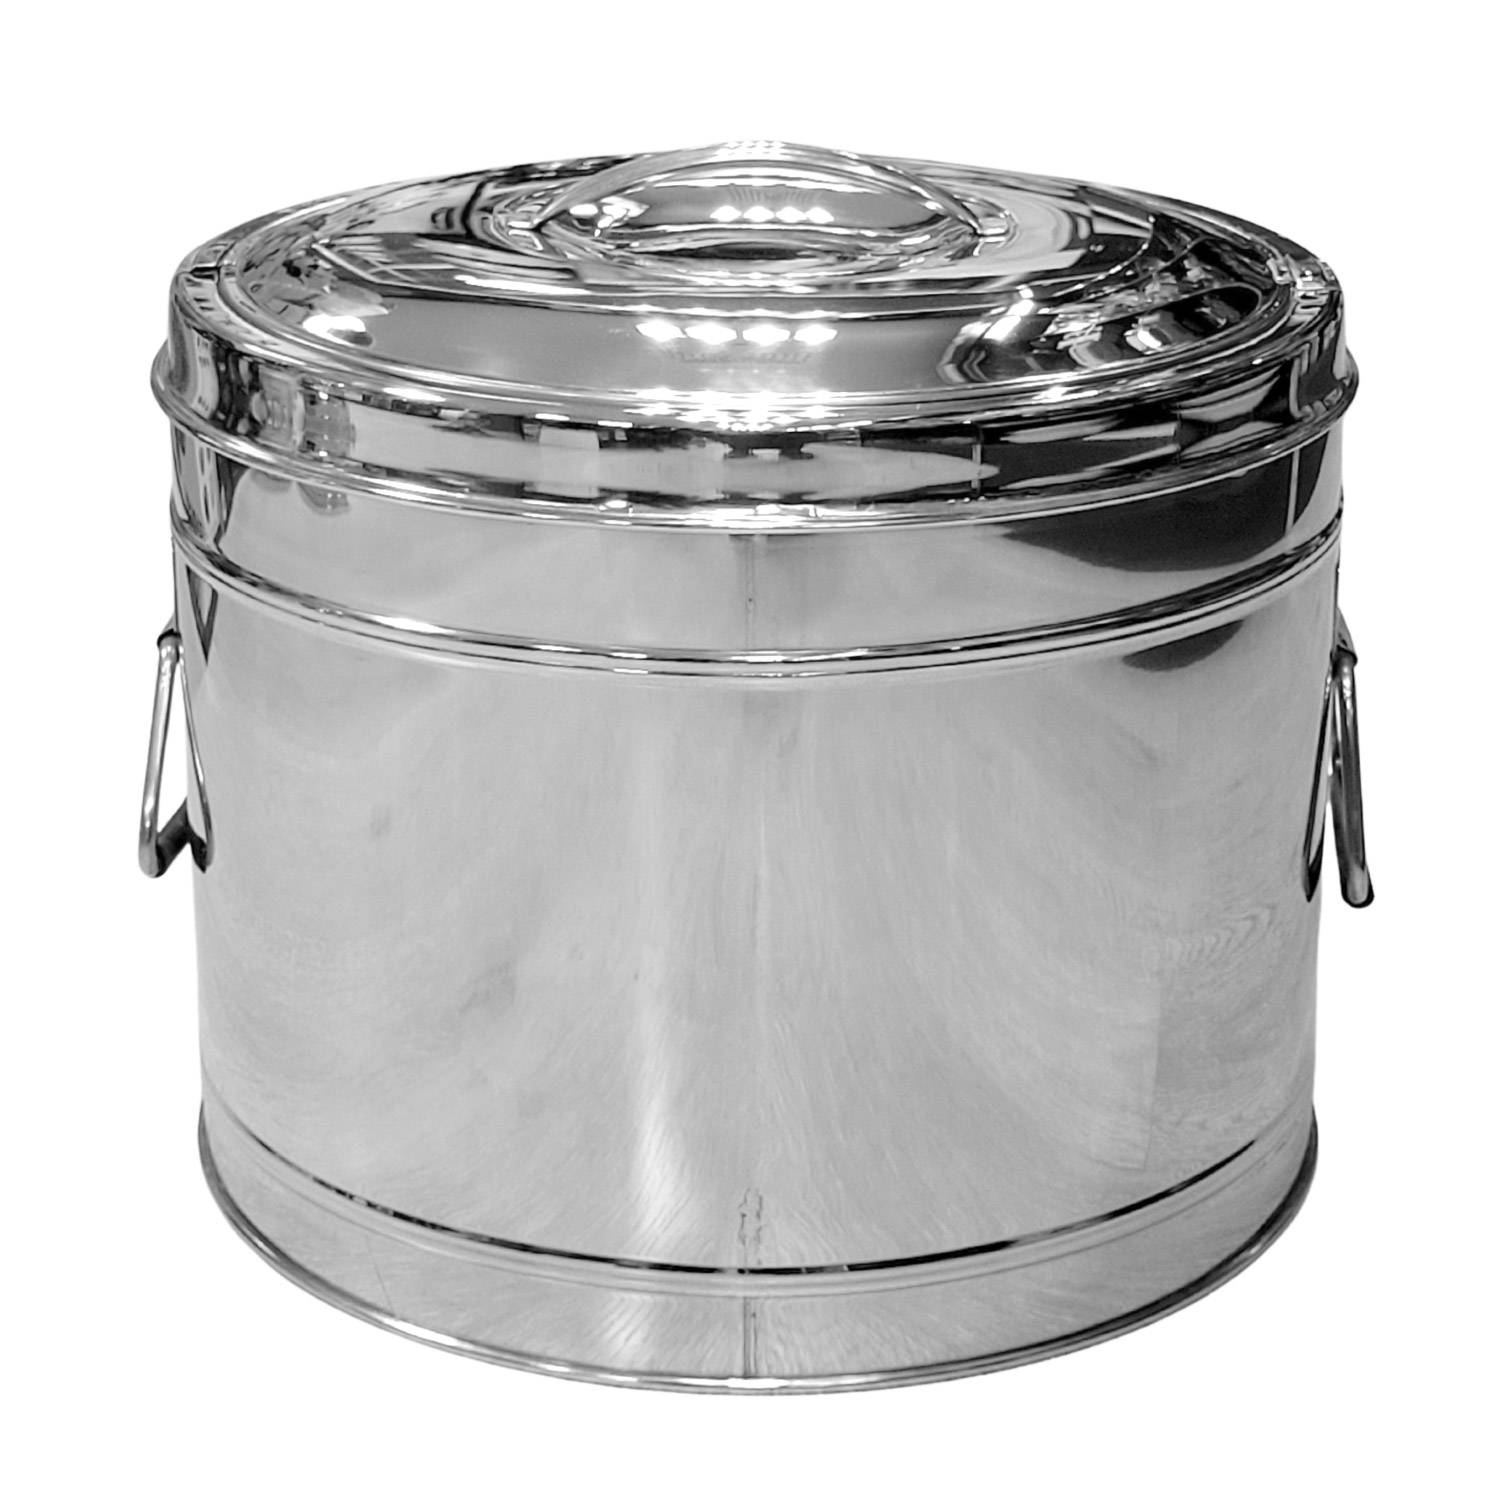 VINOD INSULATED FOOD STORAGE CONTAINERS 15 LTR